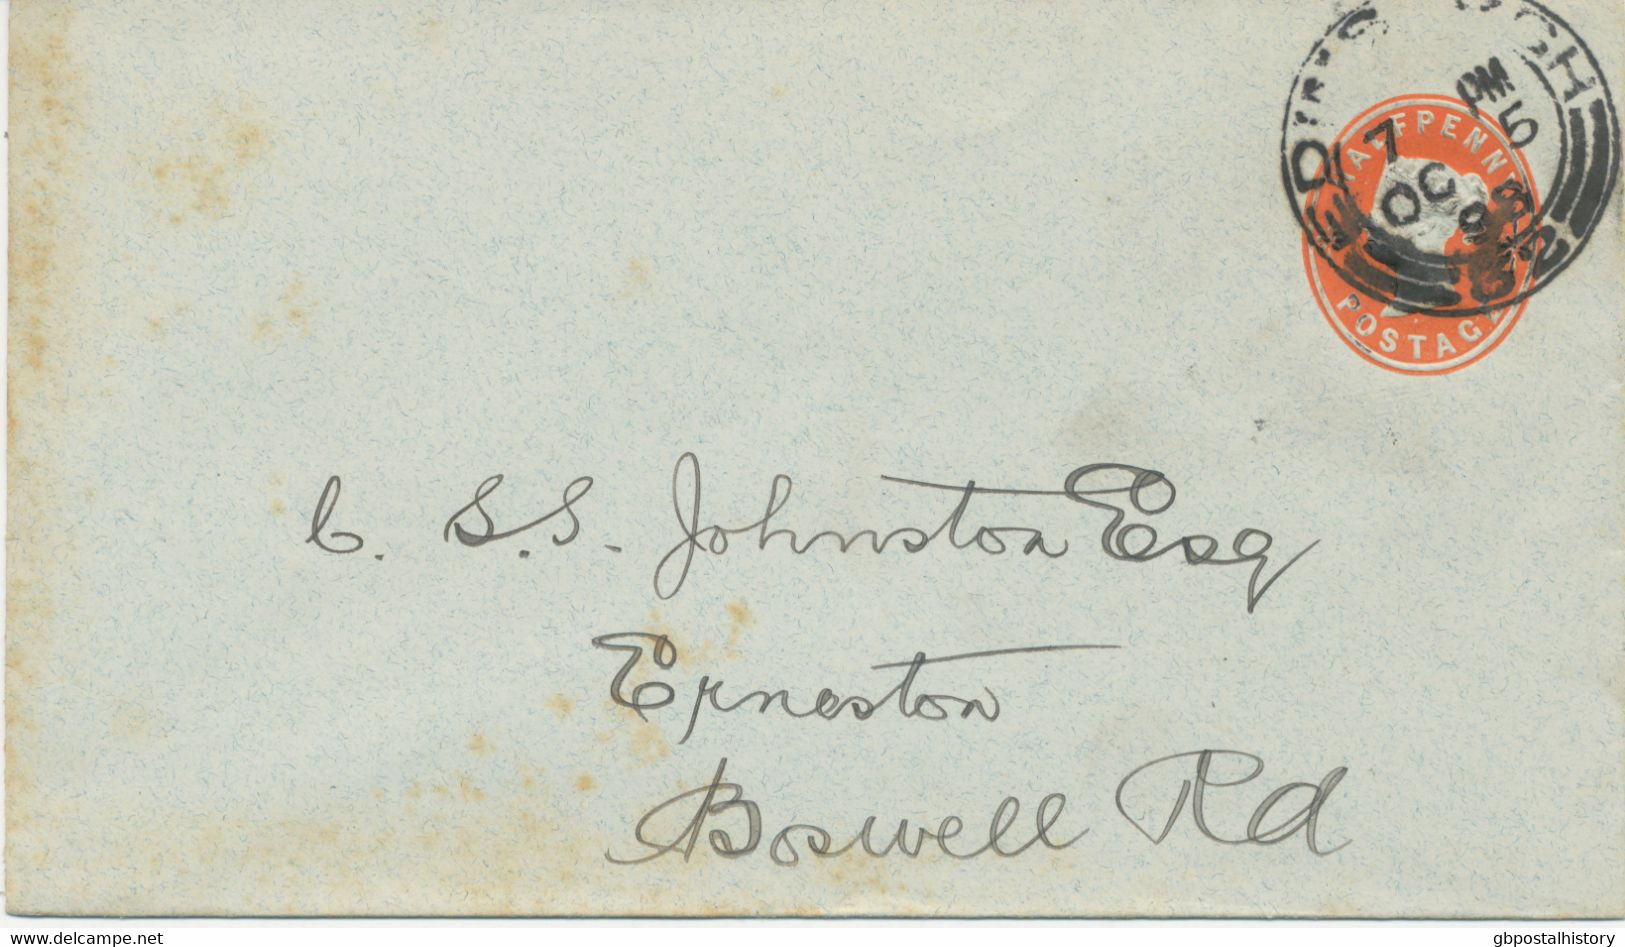 GB „EDINBURGH / 32“ Double Cirlce (29mm) Fine/very Fine QV ½d Embossed Stamped To Order Postal Stationery Envelope 1898 - Escocia